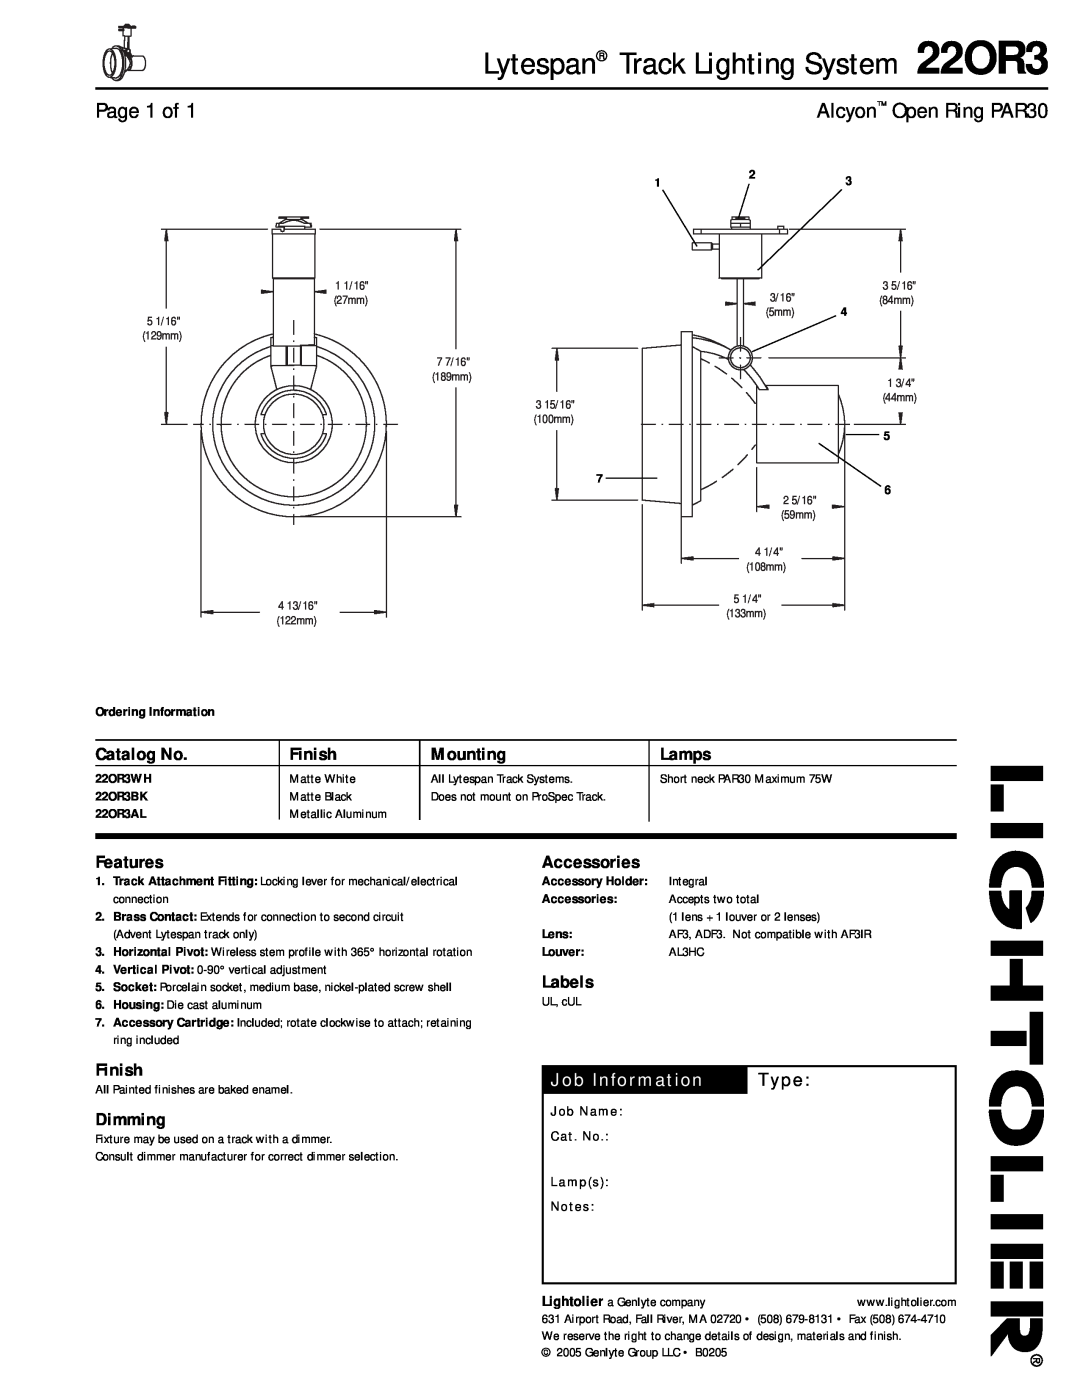 Lightolier 22OR3 manual Page 1 of, Alcyon Open Ring PAR30, Catalog No, Finish, Mounting, Lamps, Features, Labels, Dimming 